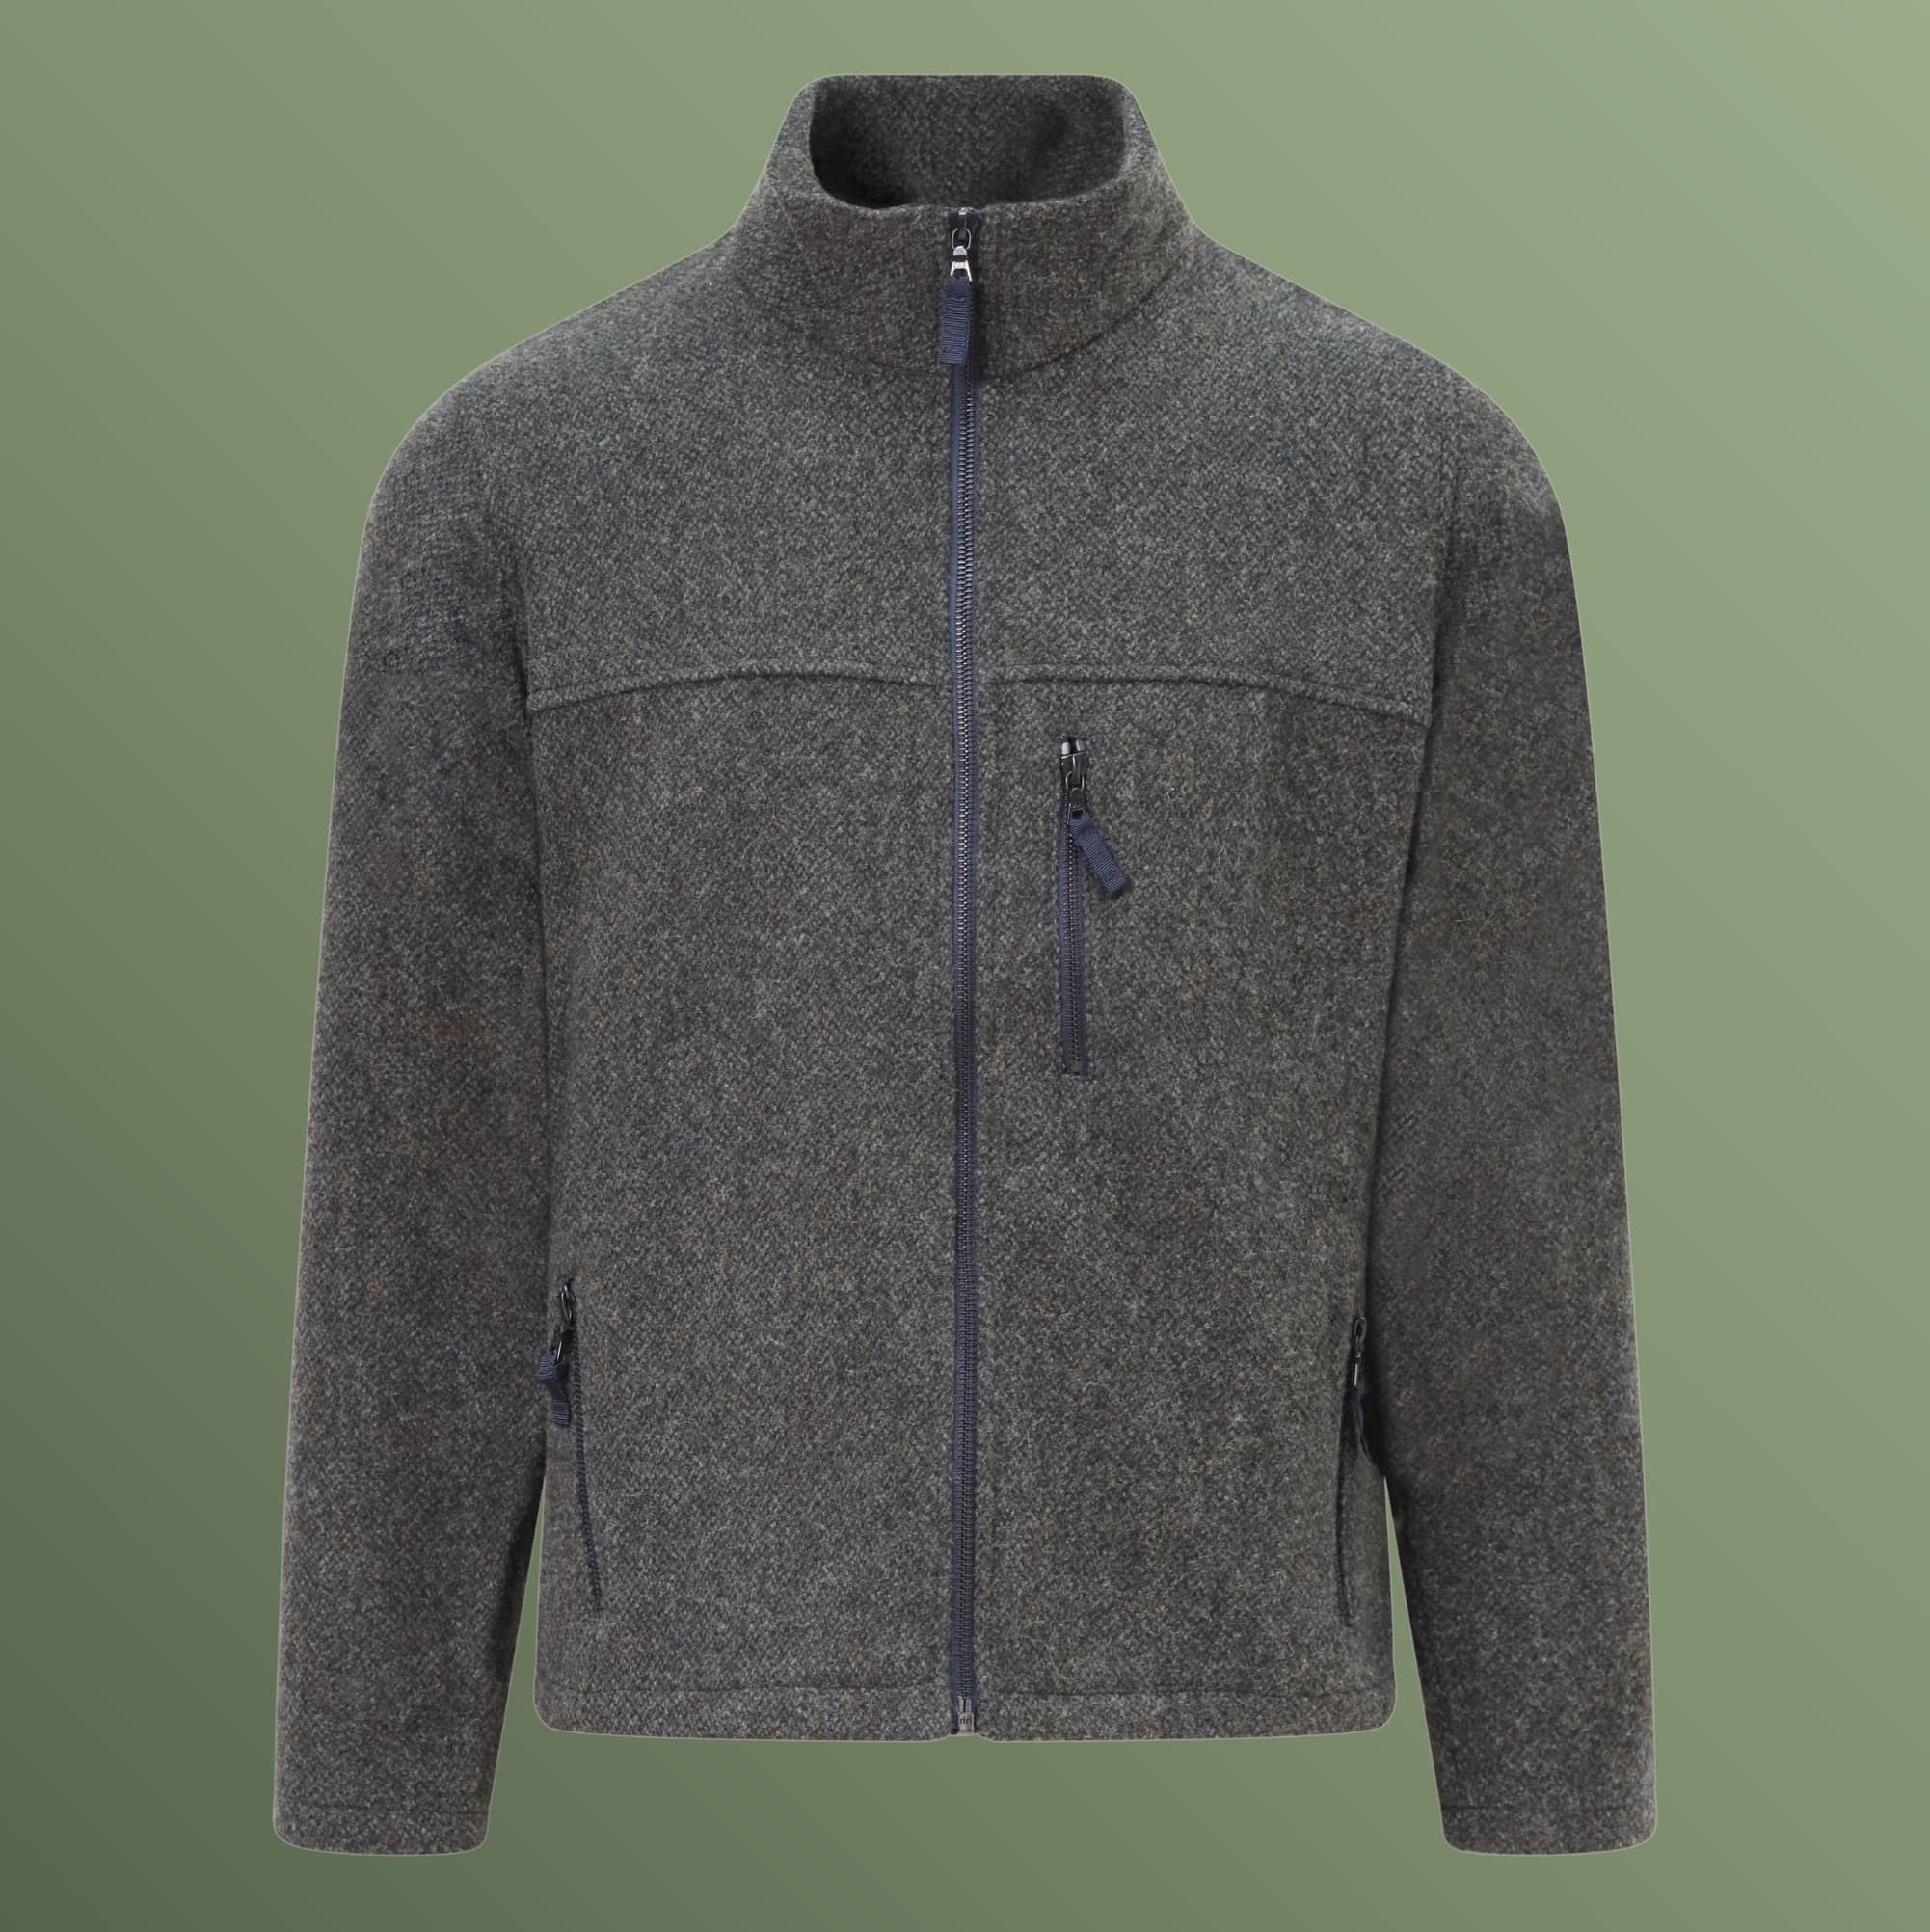 PureFleece 100% Merino Wool mid layer Jacket . Created with our unique weave for superior performance over knitted merino fleece tops.